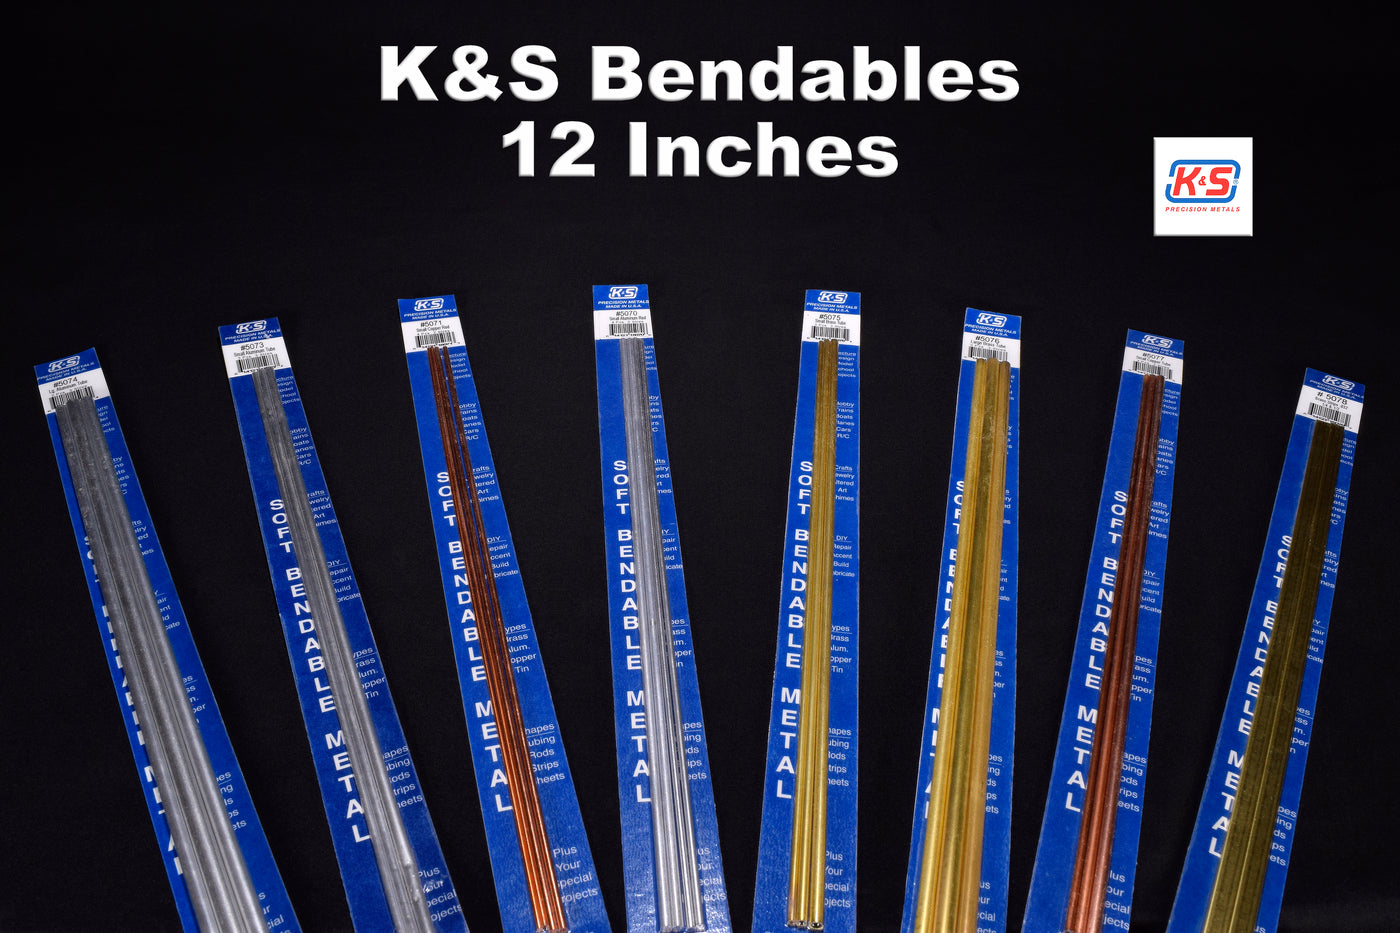 K&S Bendable Brass Rod 1/16 and 3/64 2pcs. Each